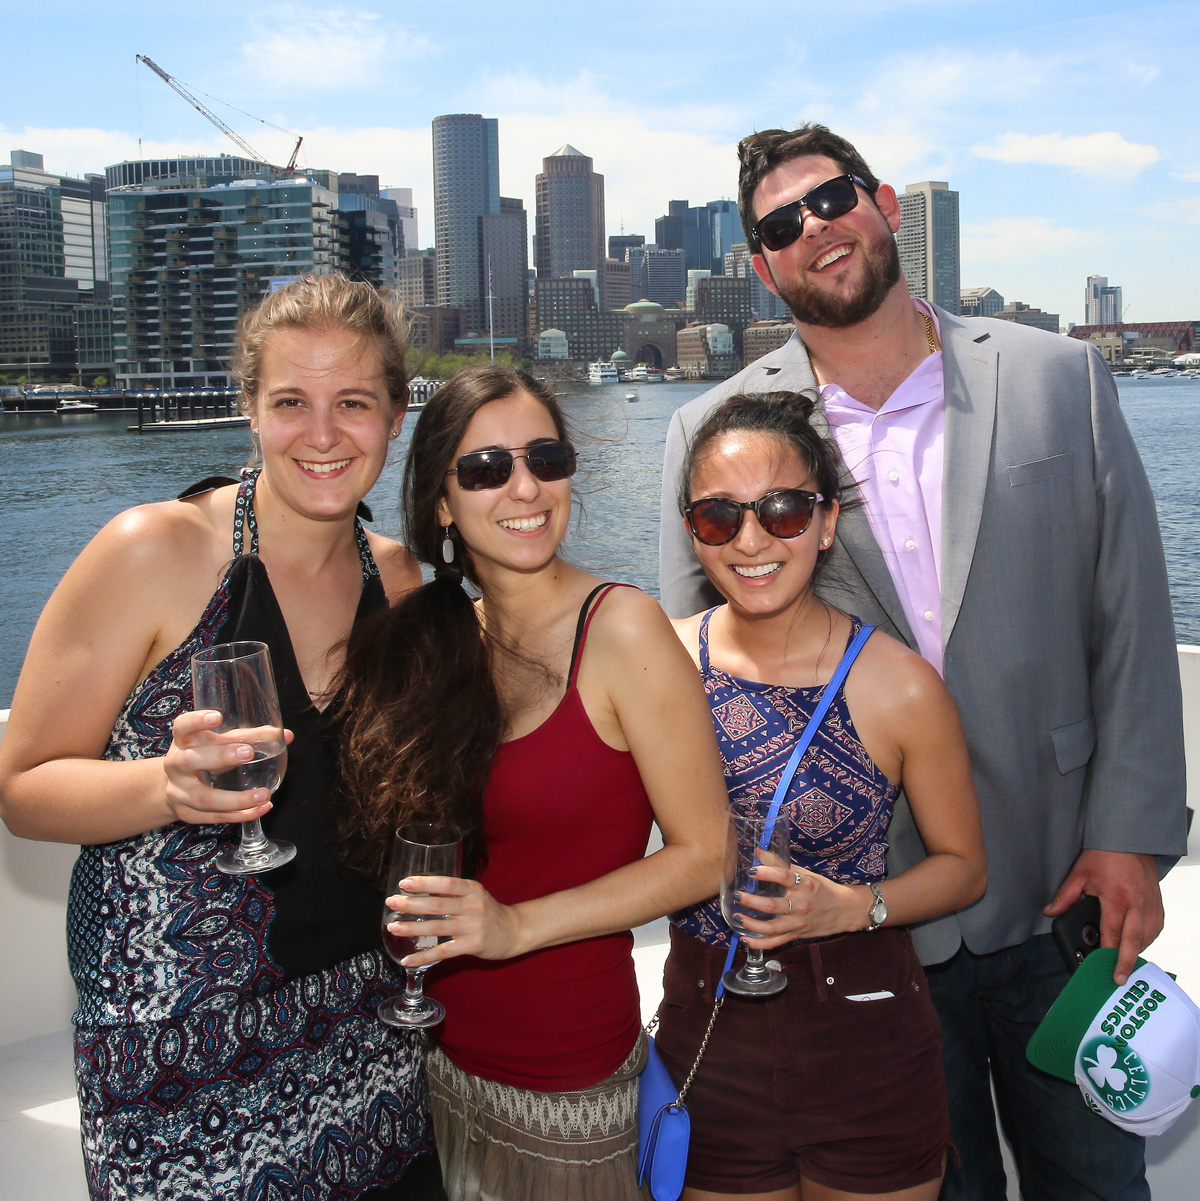 Casey posing with friends during the Senior Week Boston Harbor boat cruise.